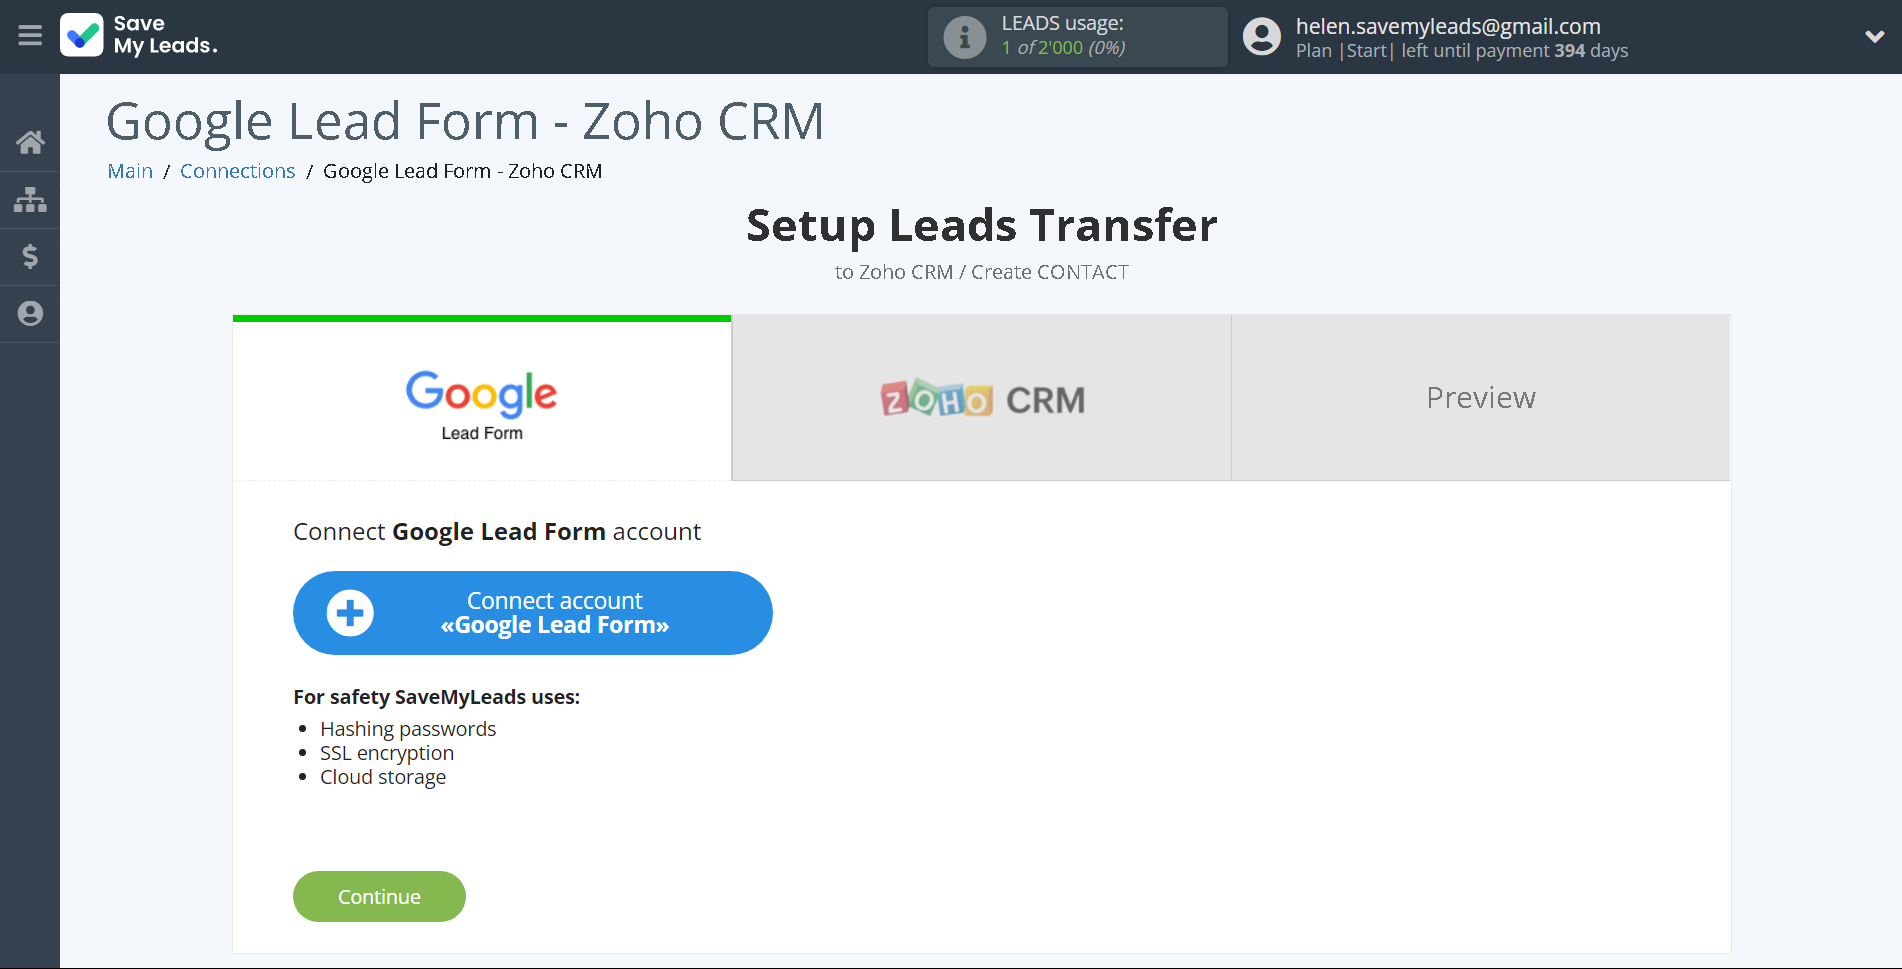 How to Connect Google Lead Form with Zoho CRM Create Contacts | Data Source account